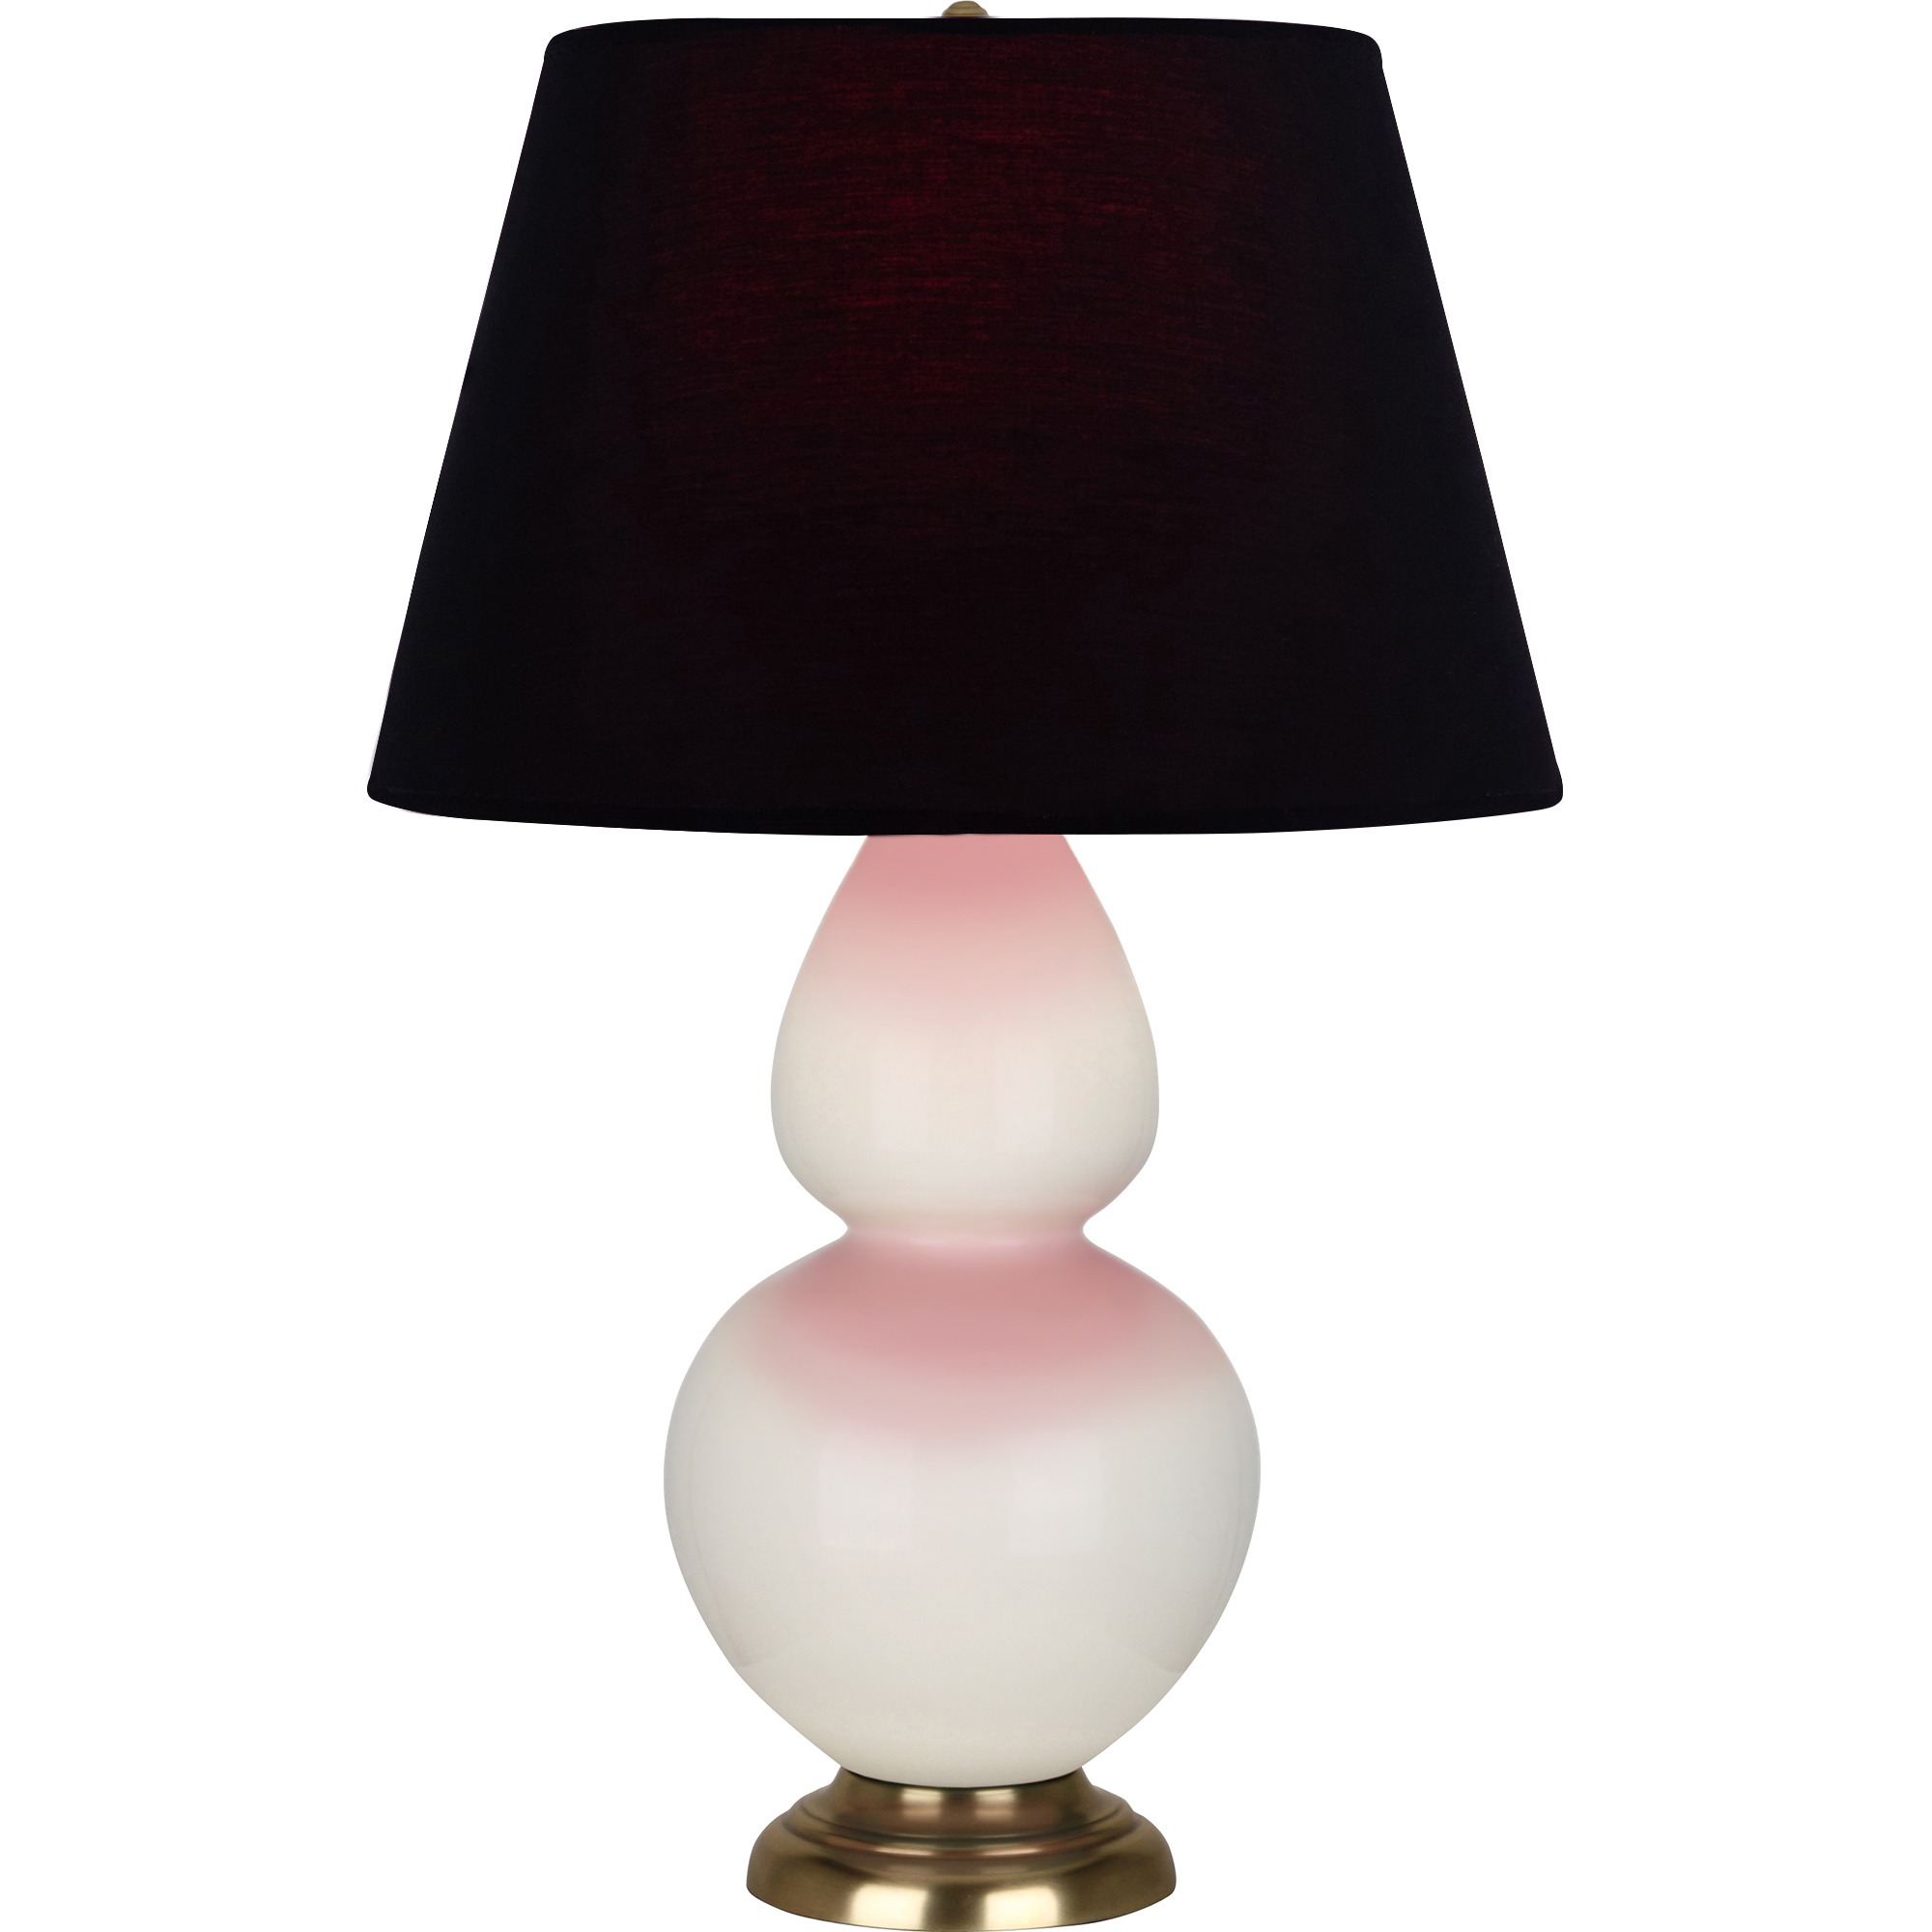 Double Gourd Table Lamp Style #1754K